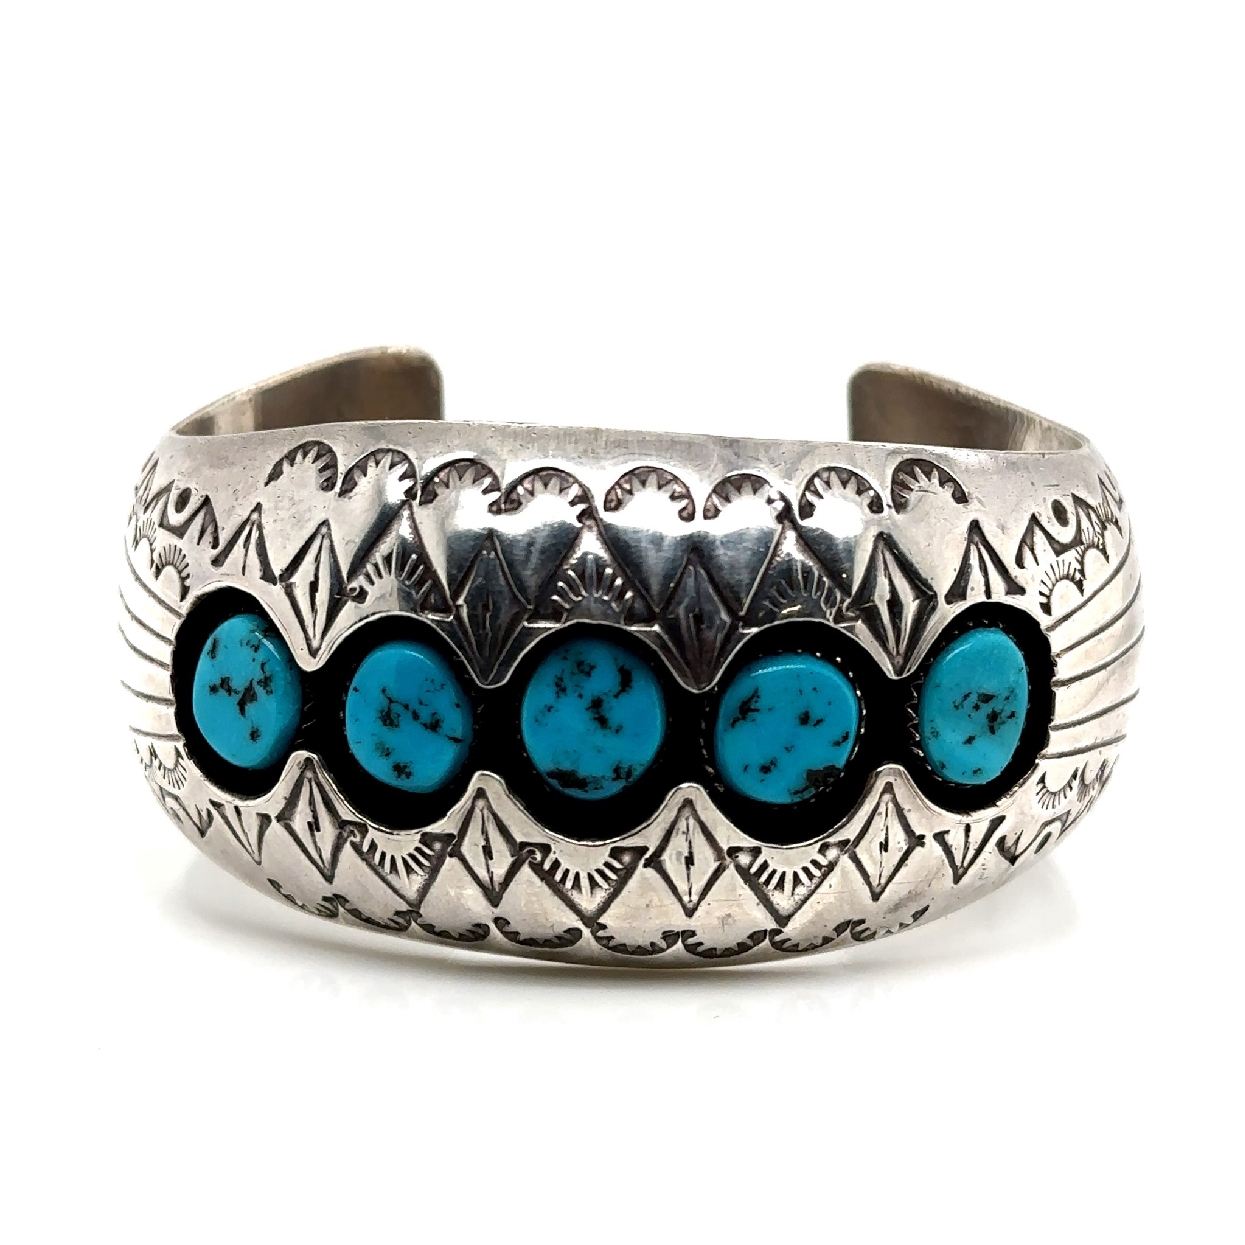 P.Benally Navajo Sterling Silver and Turquoise Cuff

Fits 7 Inch Wrist 
1.25 Inches at Widest 